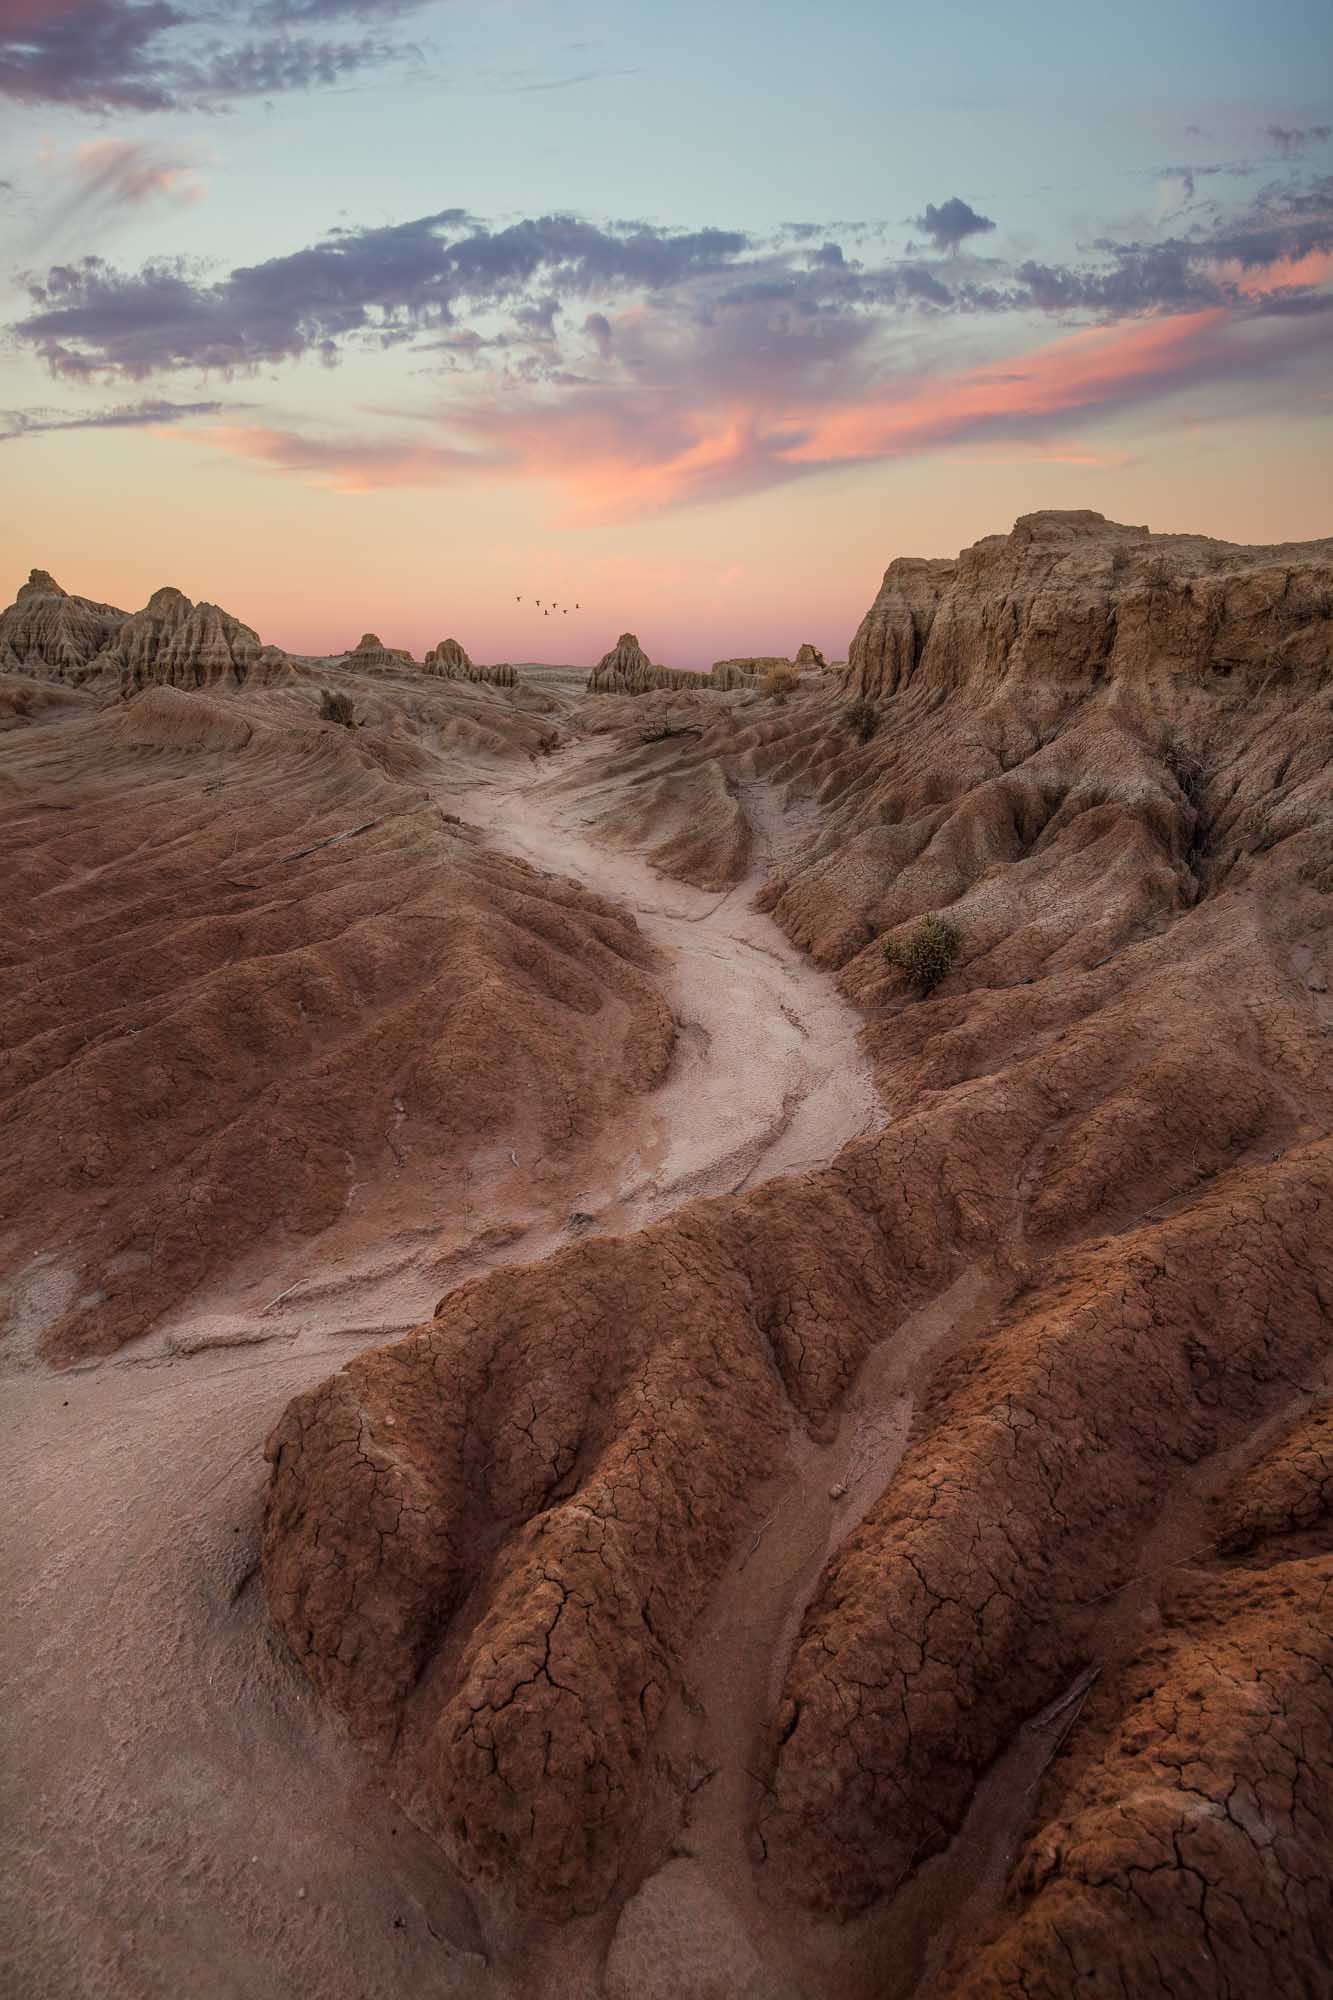 A dusty path through the eroded formations of Mungo National Park, under a sunset sky with streaks of pink and blue.